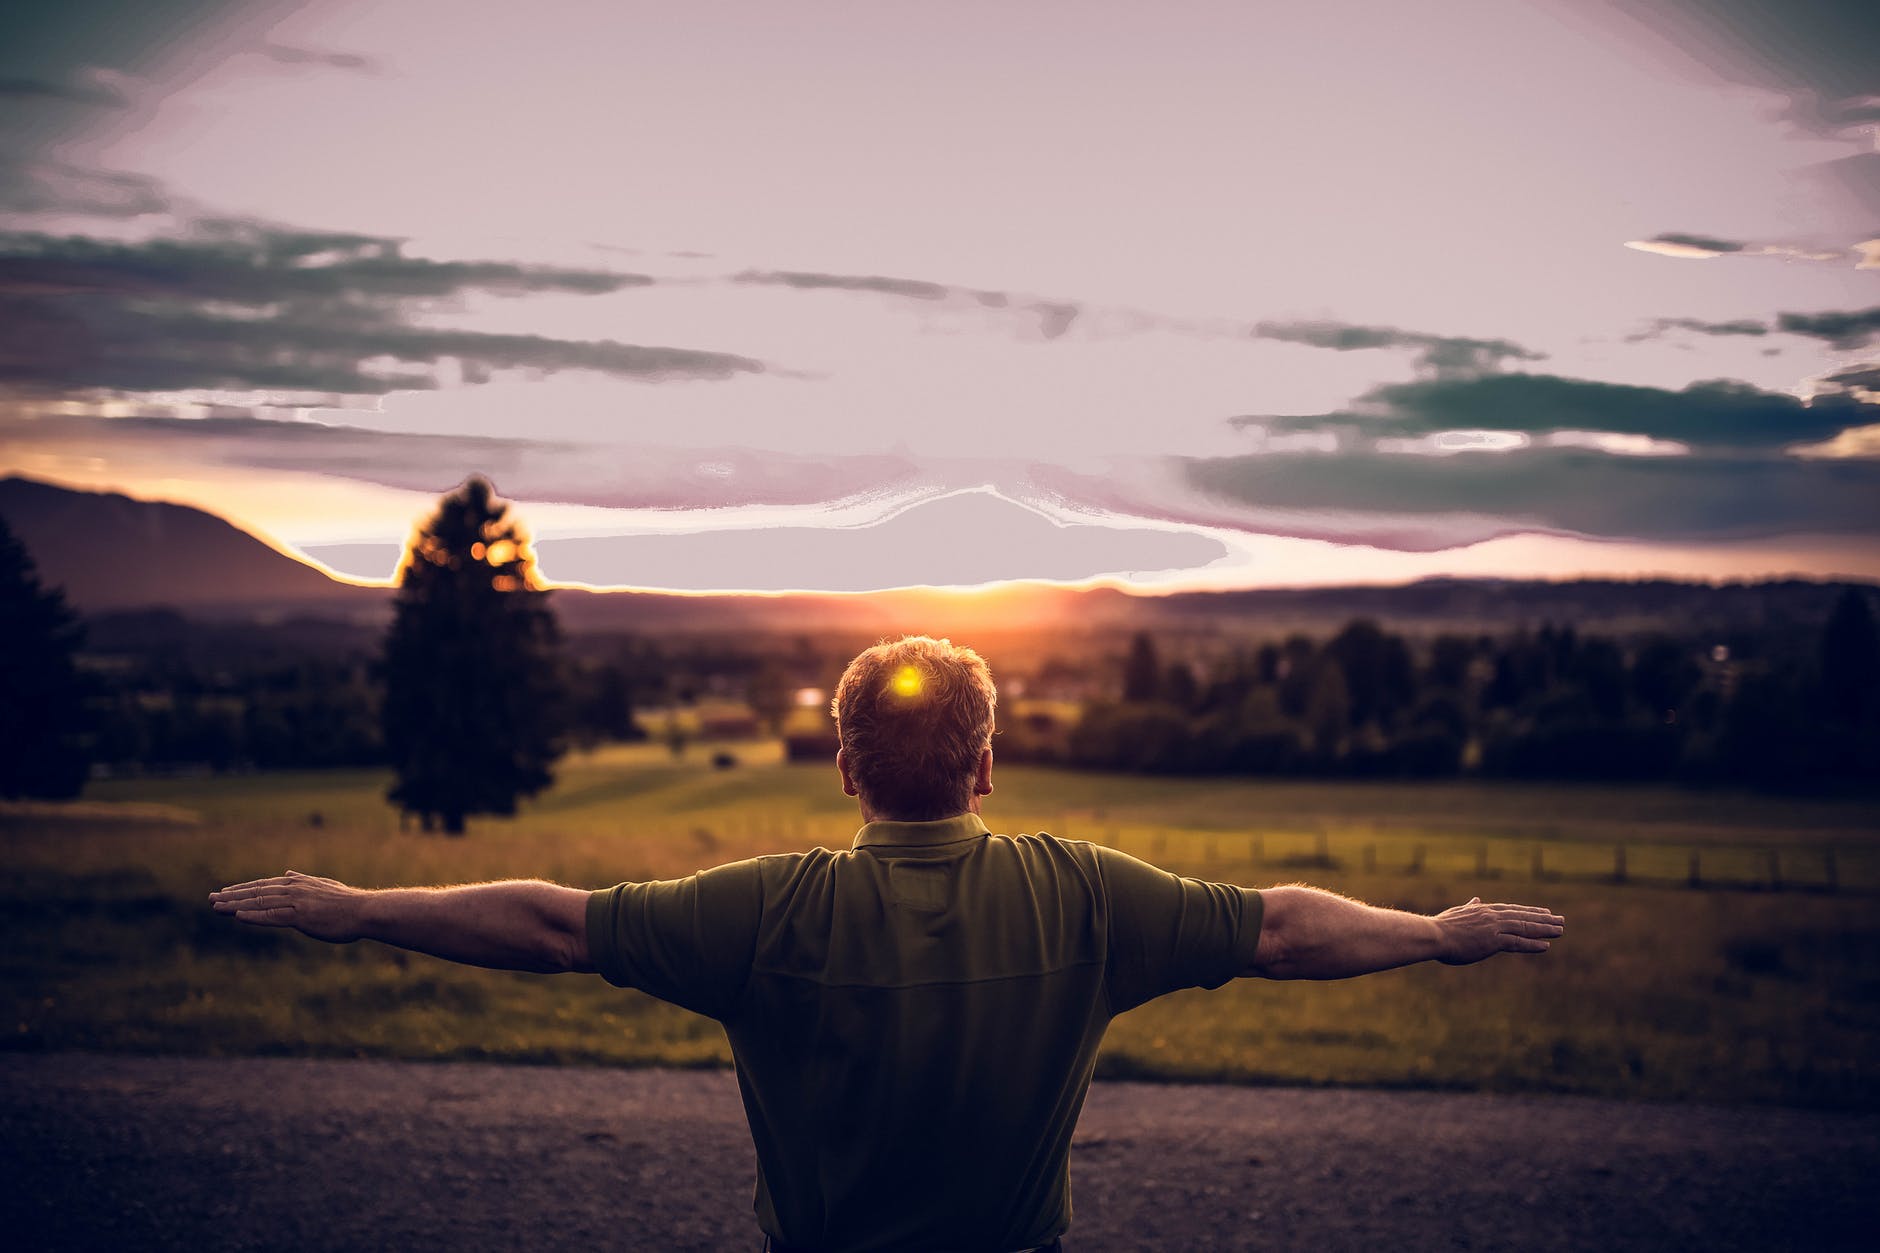 Man with outstretched arms looking at sun setting over fields